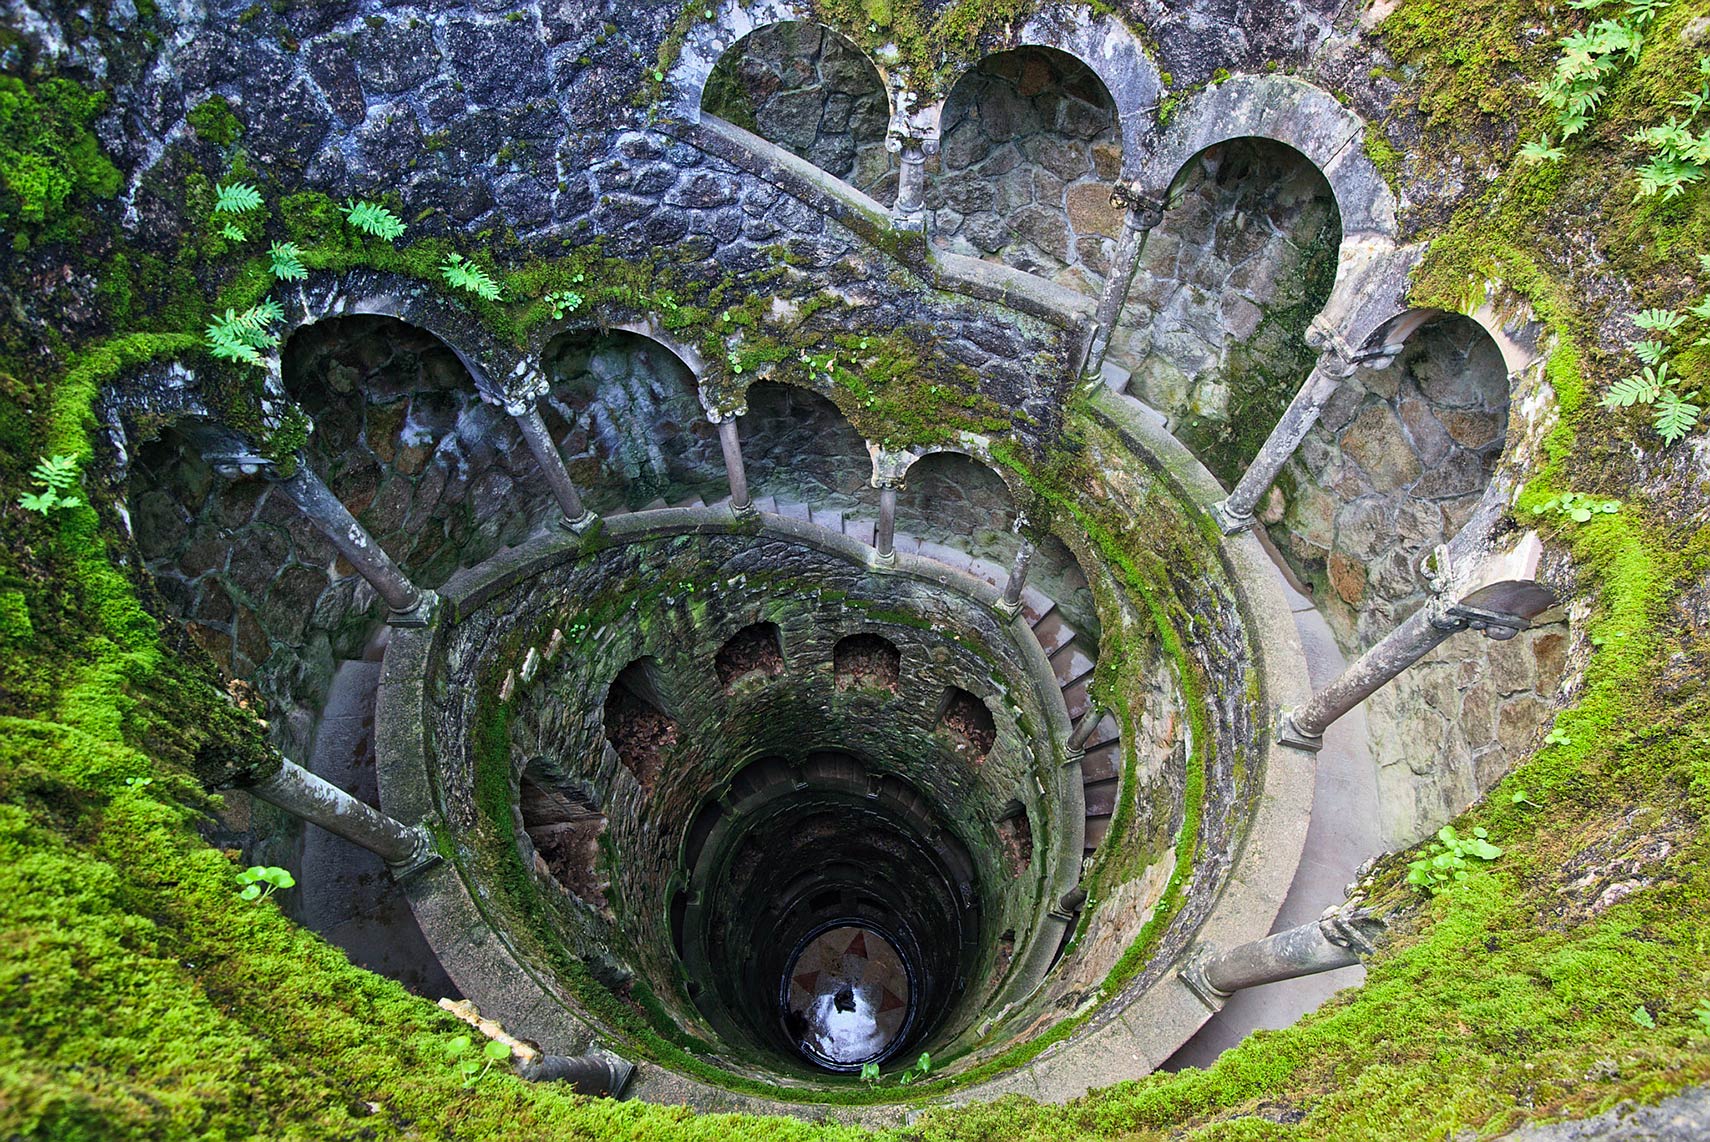 The "Initiation Well" at Quinta da Regaleira in Sintra